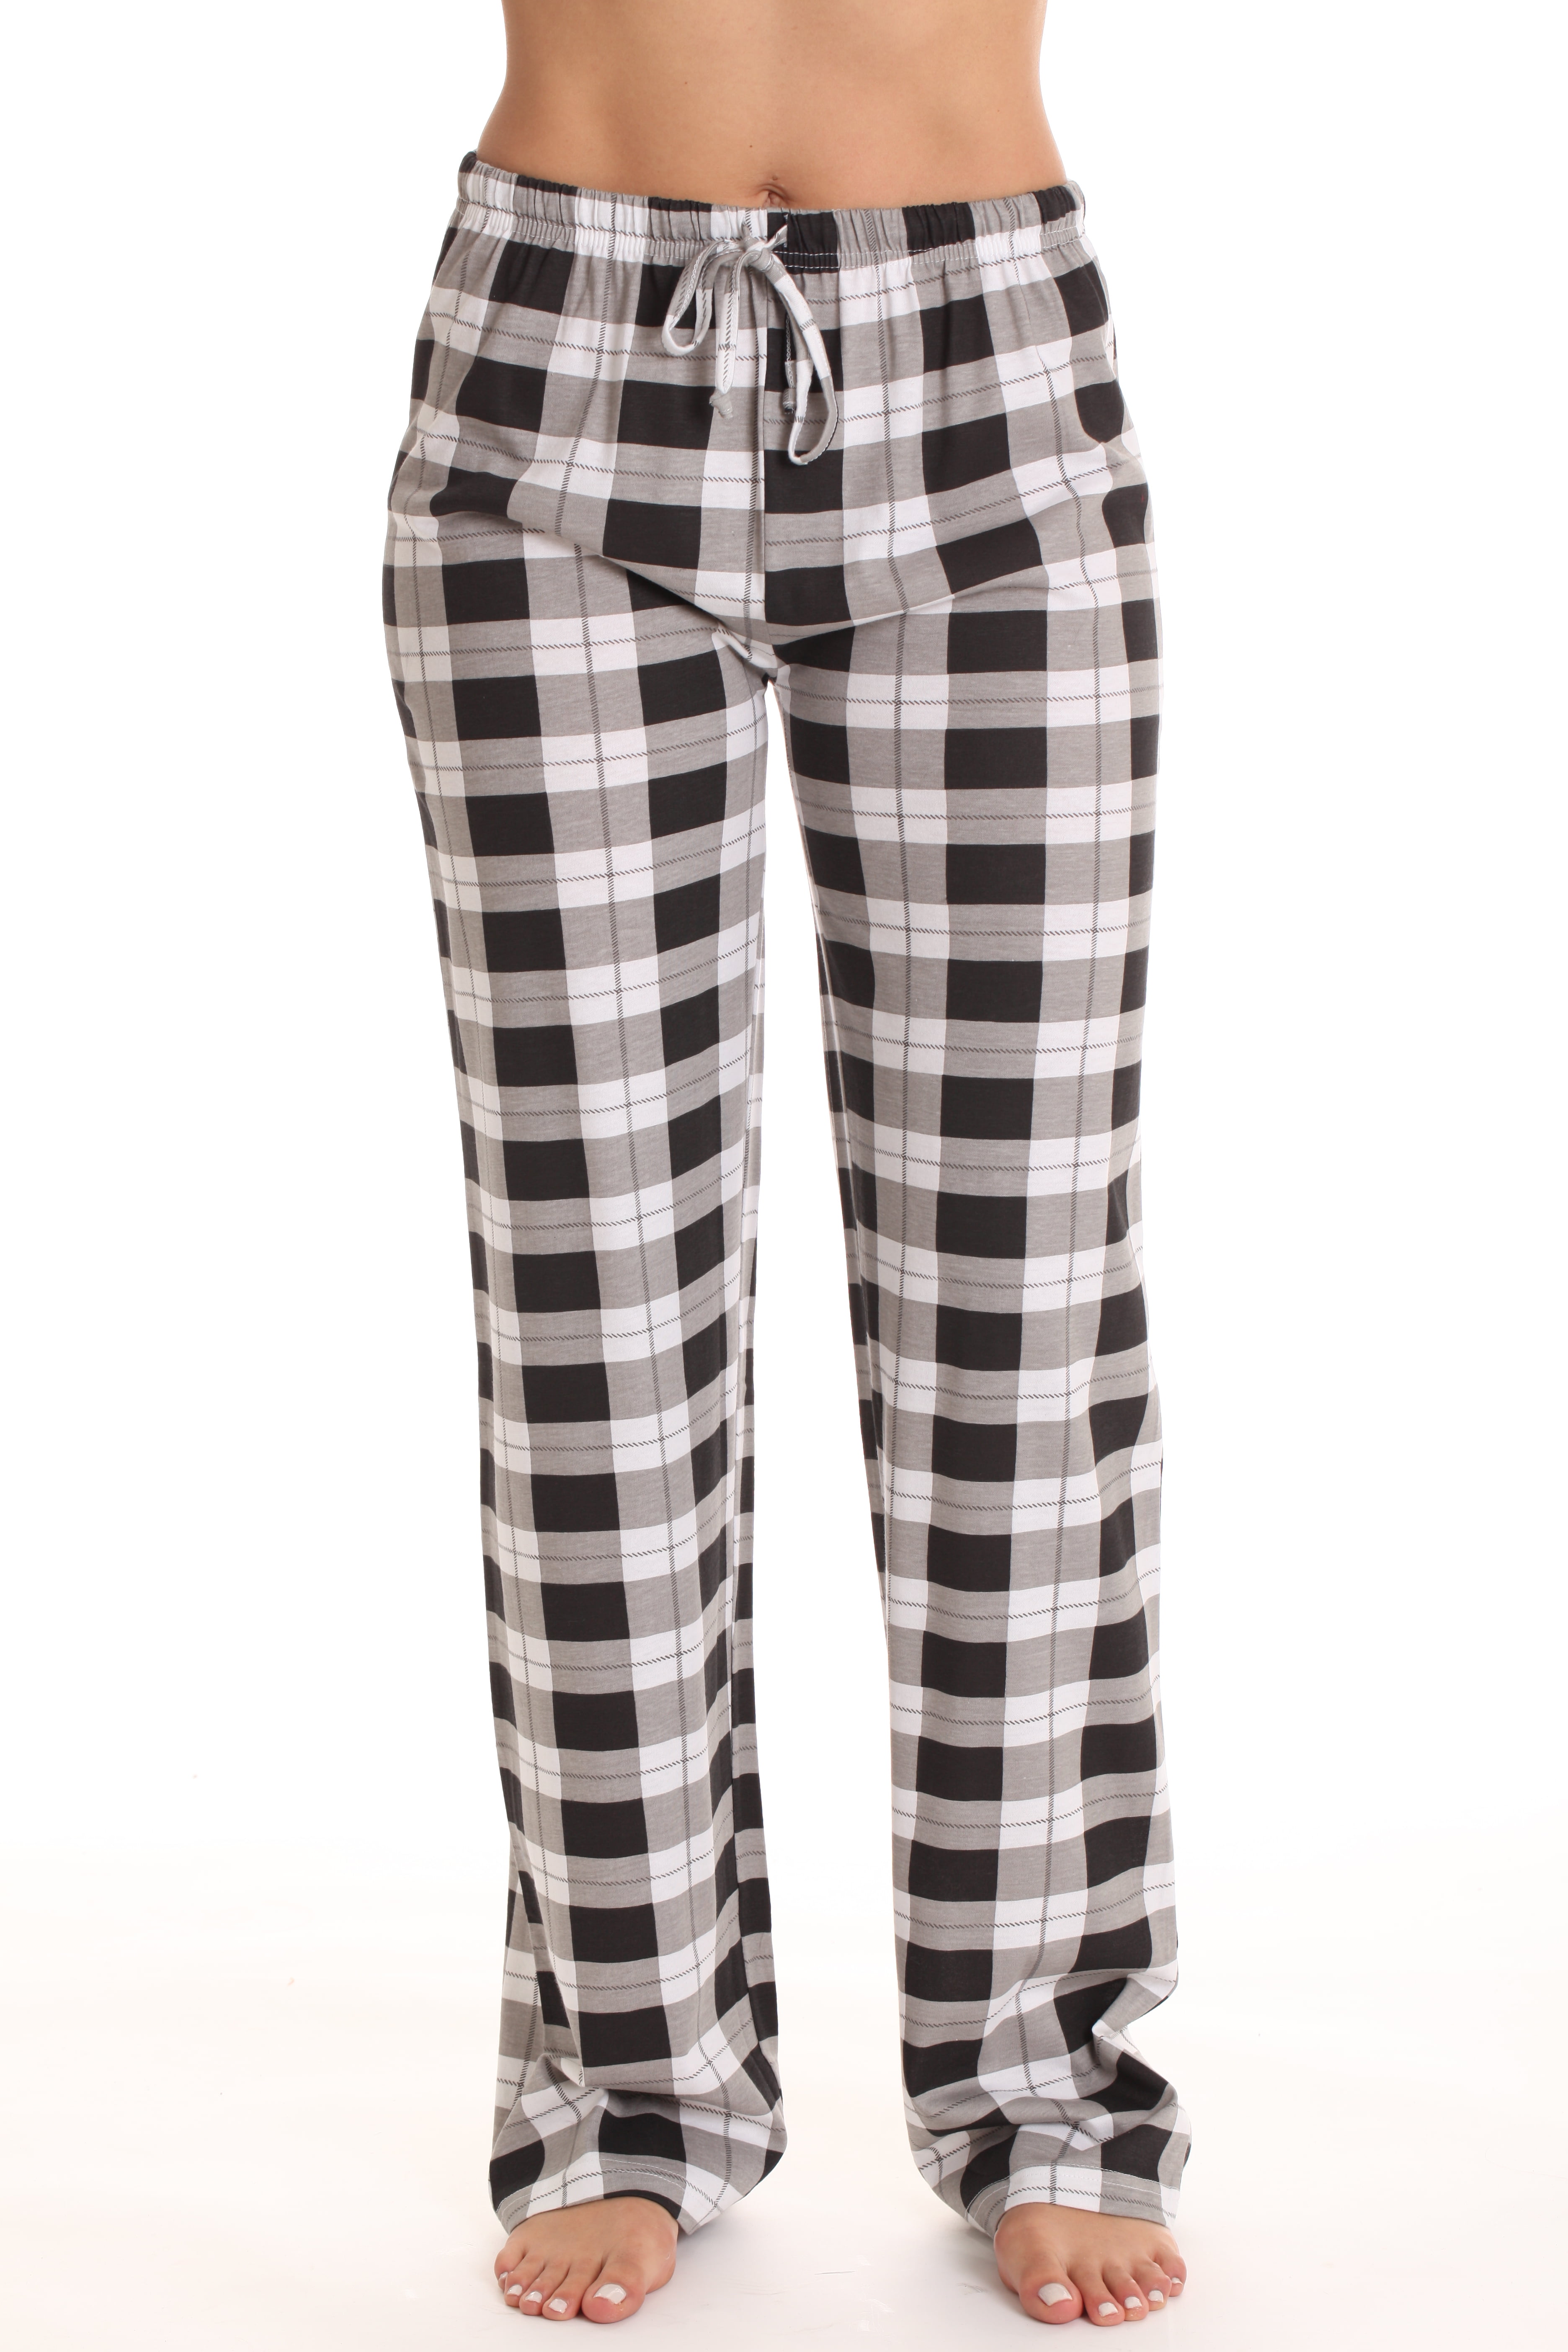 Just Love Women's Plaid Pajama Pants in 100% Cotton Jersey - Comfortable  Sleepwear for Women (Black - Plaid, Small)